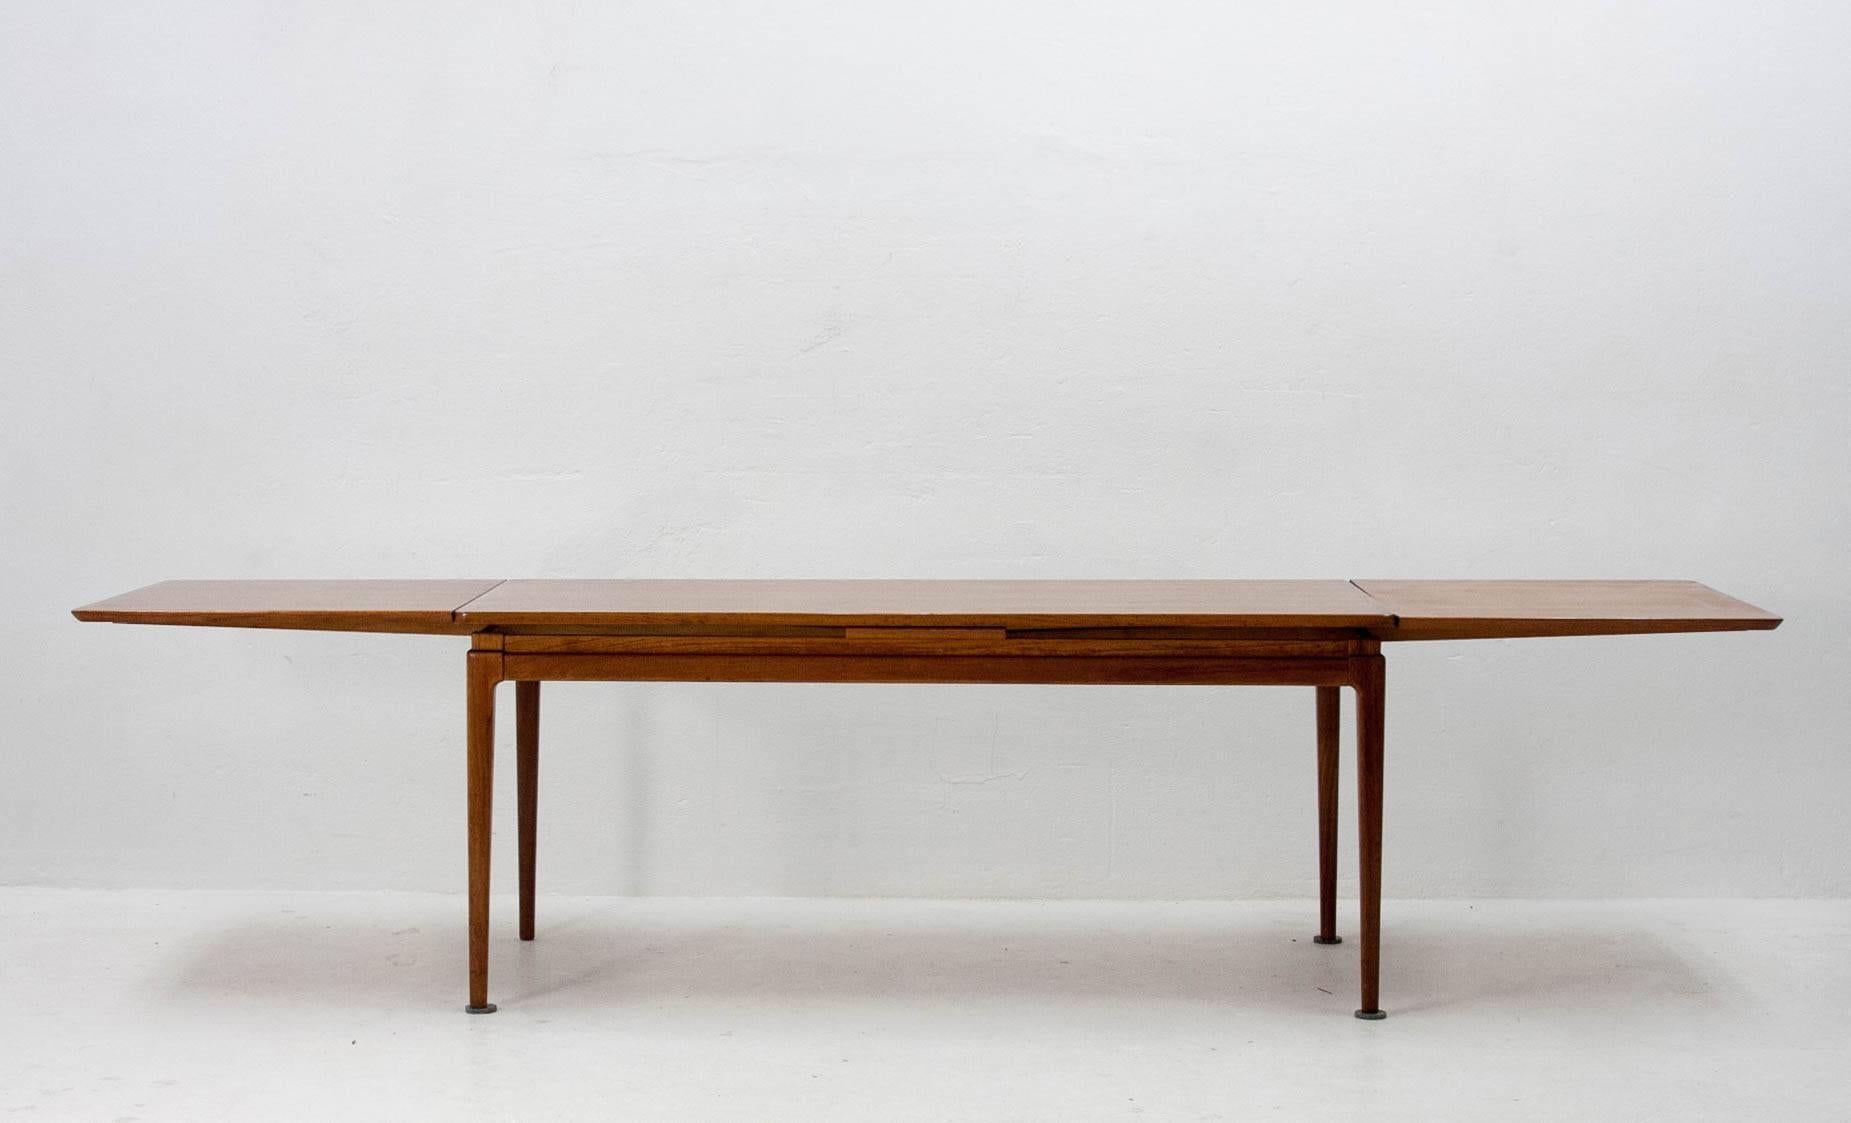 Beautiful and generously sized coffee table in Danish teak veneer. Designed by Johannes Andersen for C.F.C. Silkeborg. Base width is 120cm and it extends to 220cm with both sides slid out.